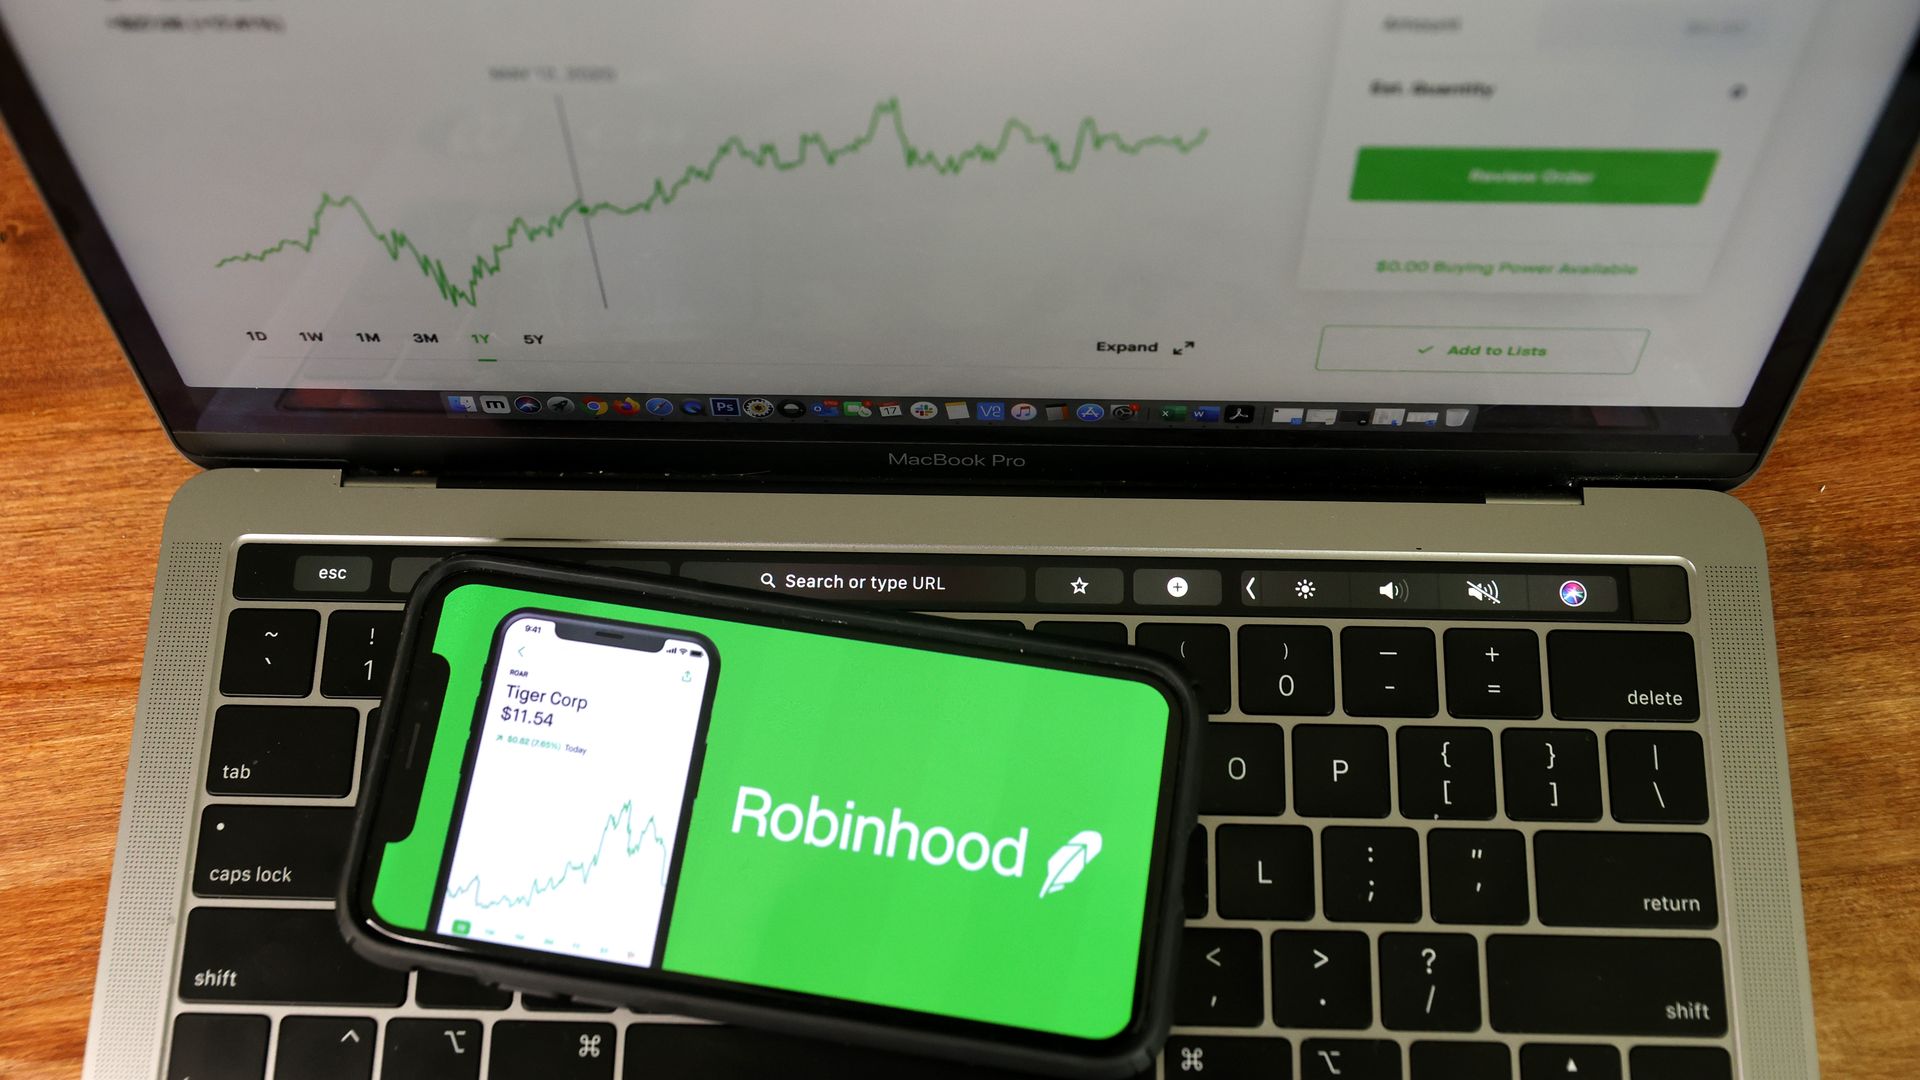 A smartphone displaying the RobinHood app is seen on the keyboard of a laptop.